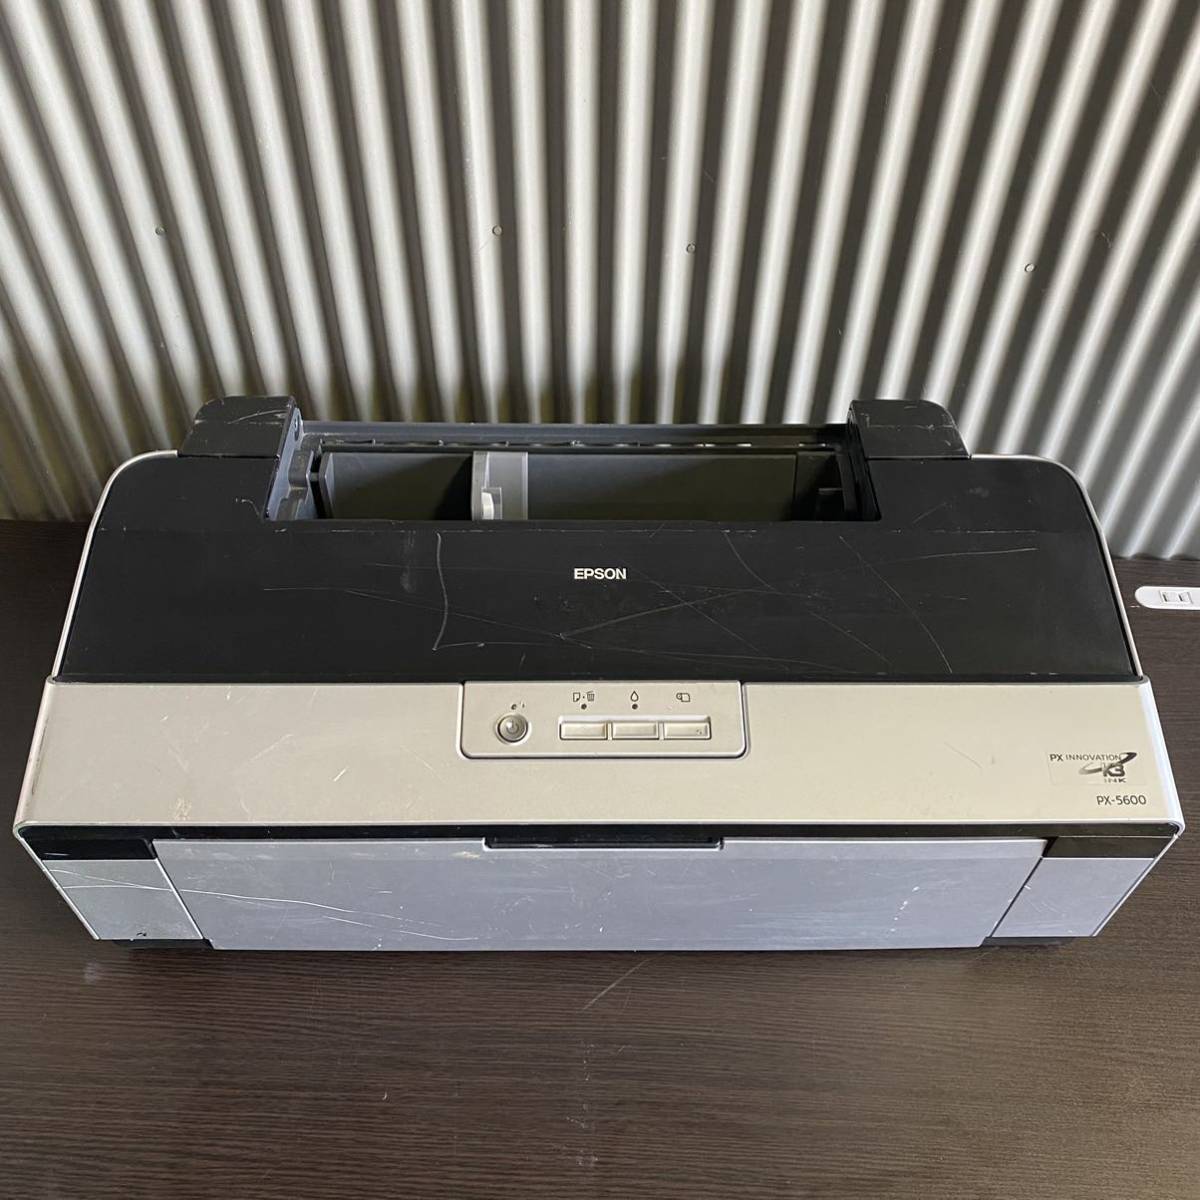 EPSON PX-5600 付属品有り ジャンク - library.iainponorogo.ac.id